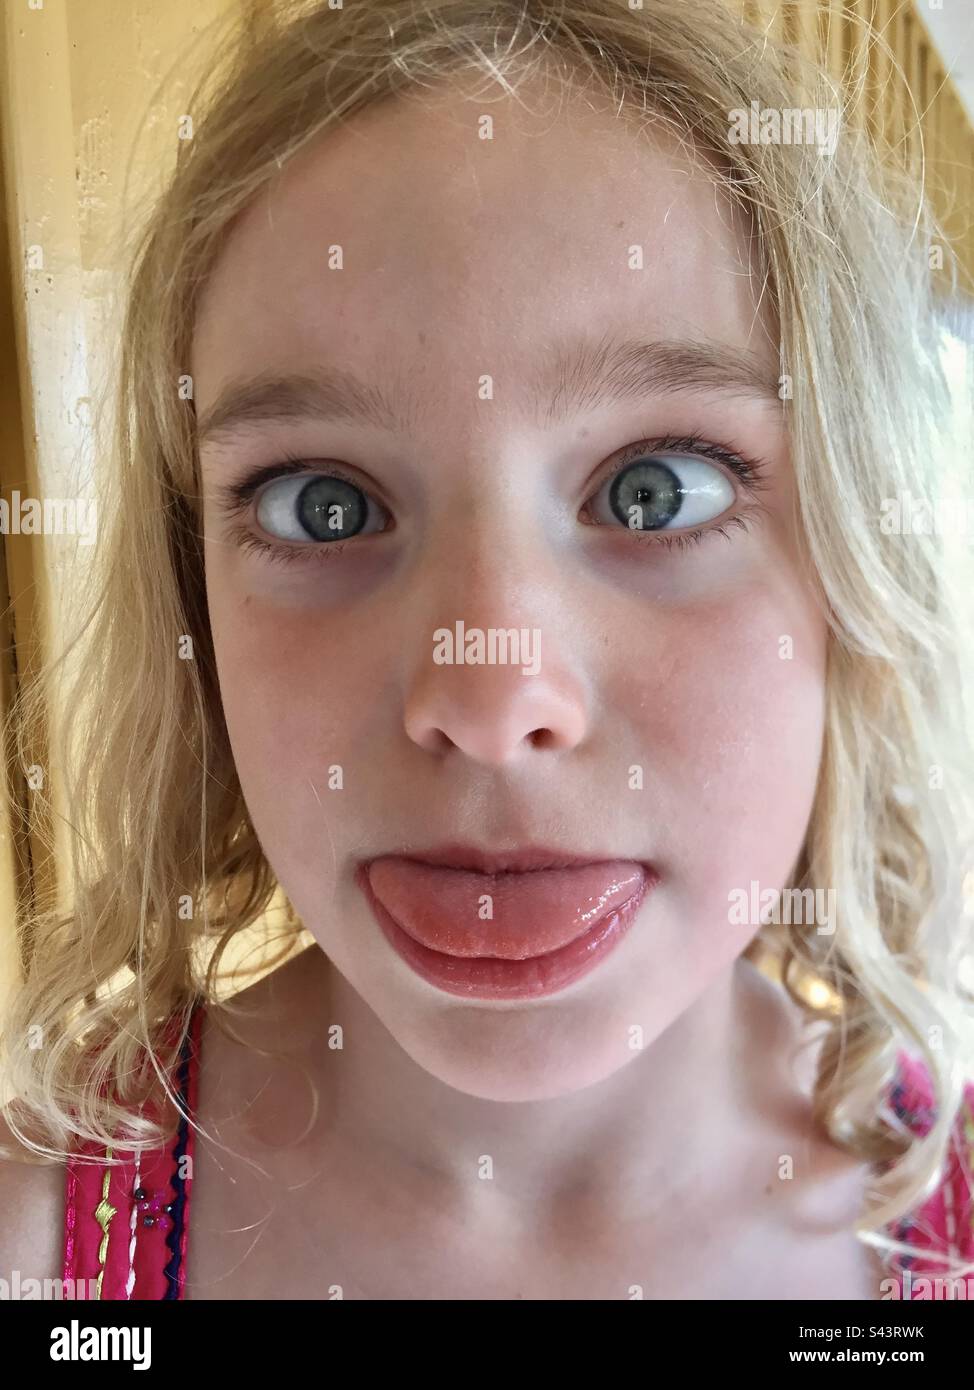 A young 7-year-old girl on messing about crossing her eyes and poking tongue out sticking tongue out making a face Stock Photo